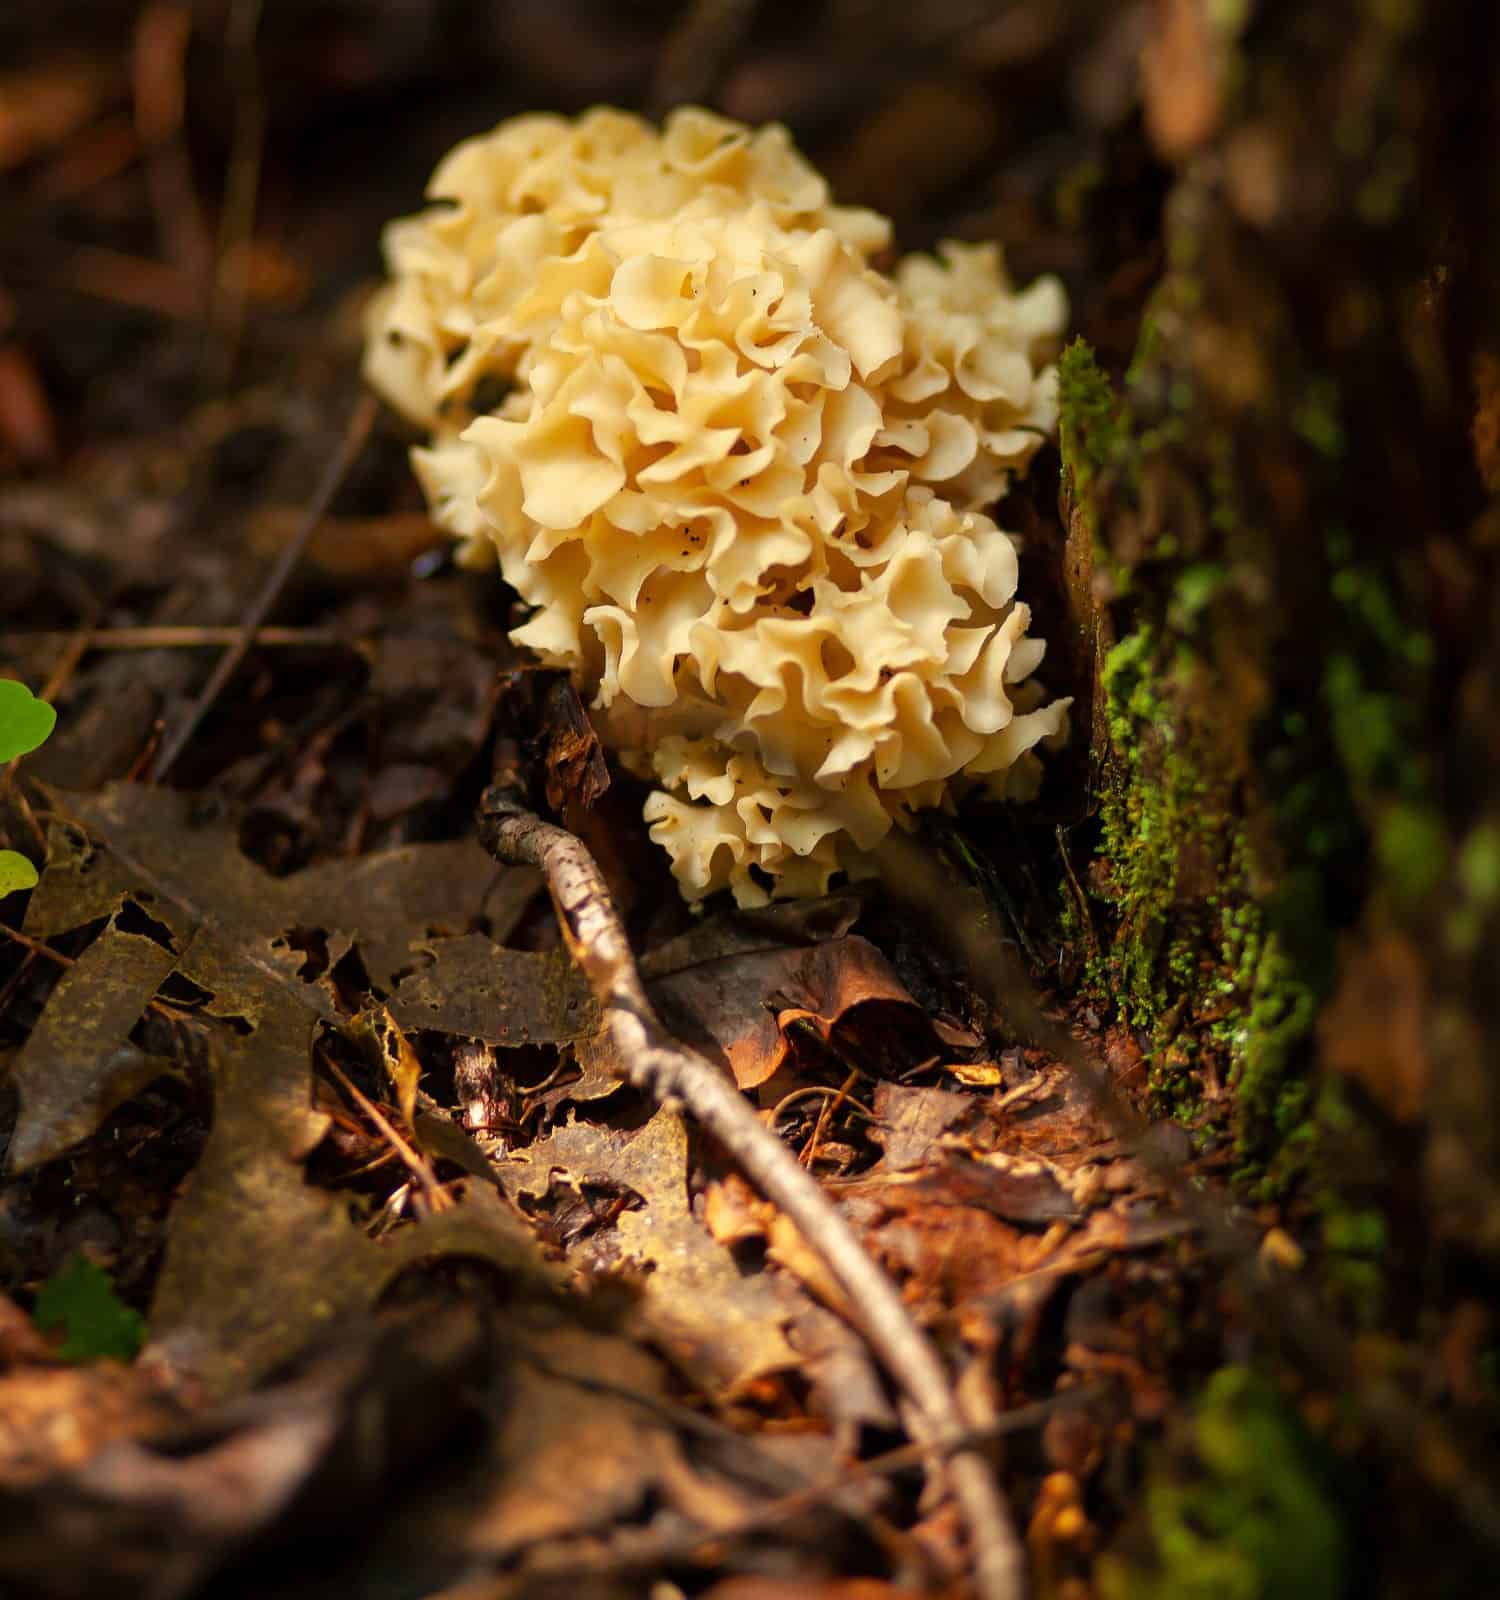 Close up image of Sparassis spathulata (the eastern cauliflower mushroom) on a muddy forest ground by a tree trunk in Maryland